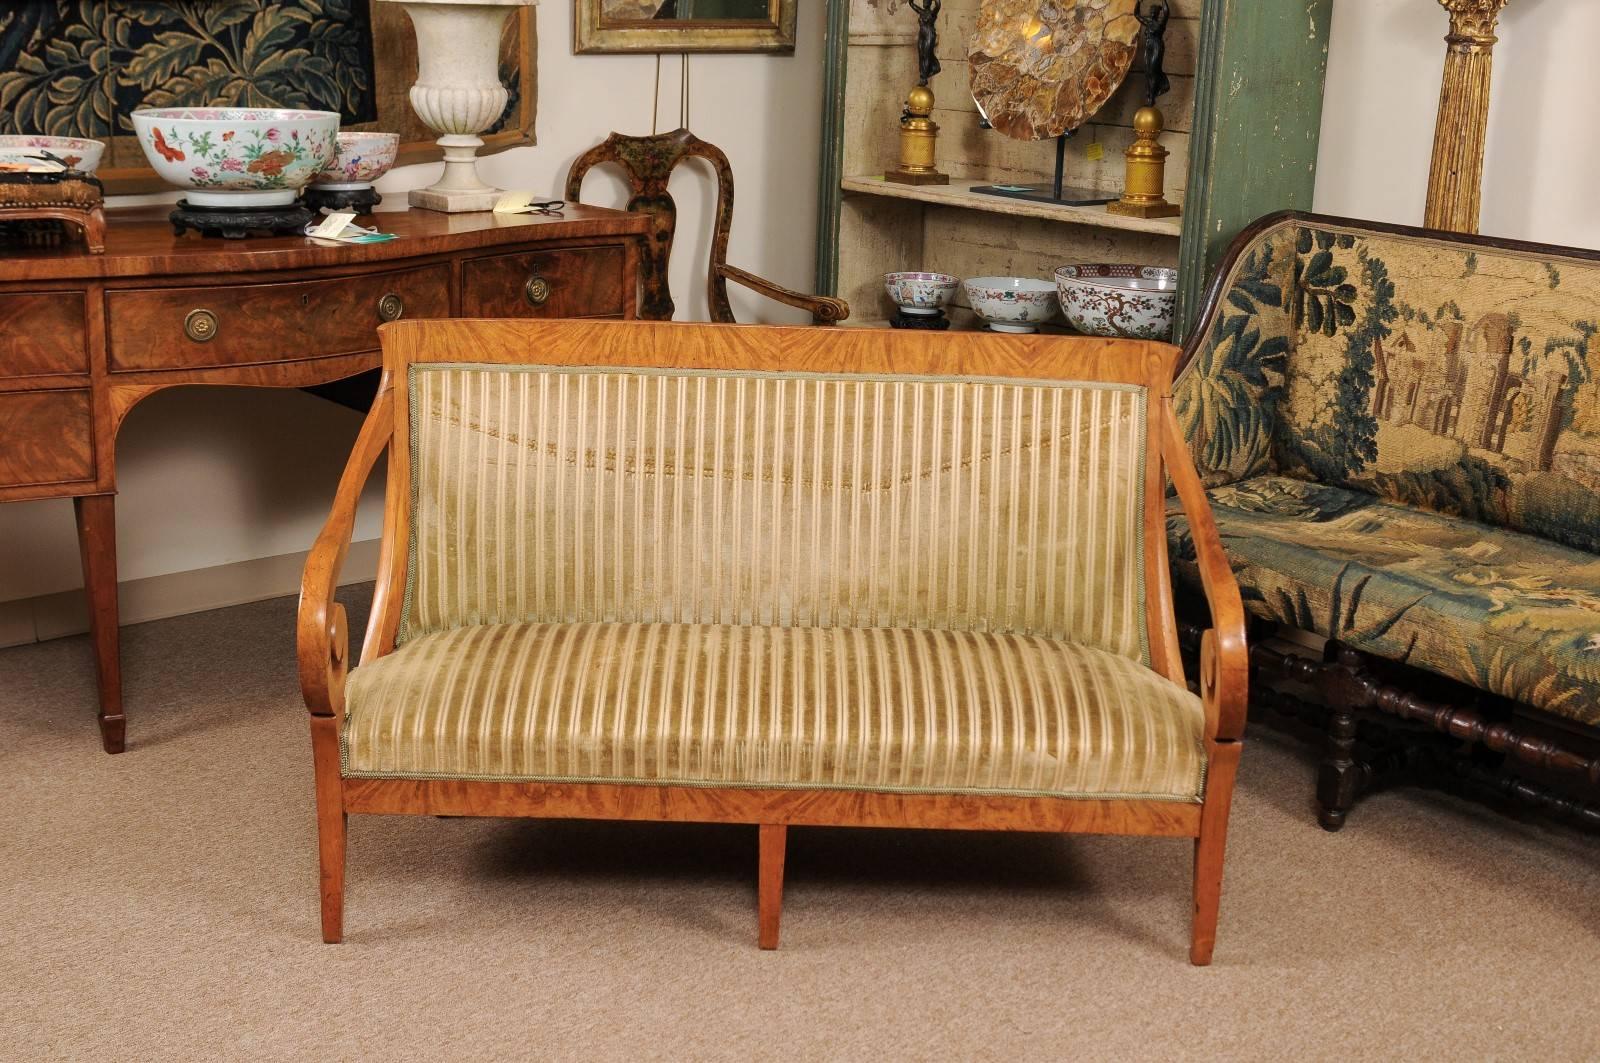 European Early 19th Biedermeier Settee with Scroll Arms and Curved Back in Birch Wood For Sale